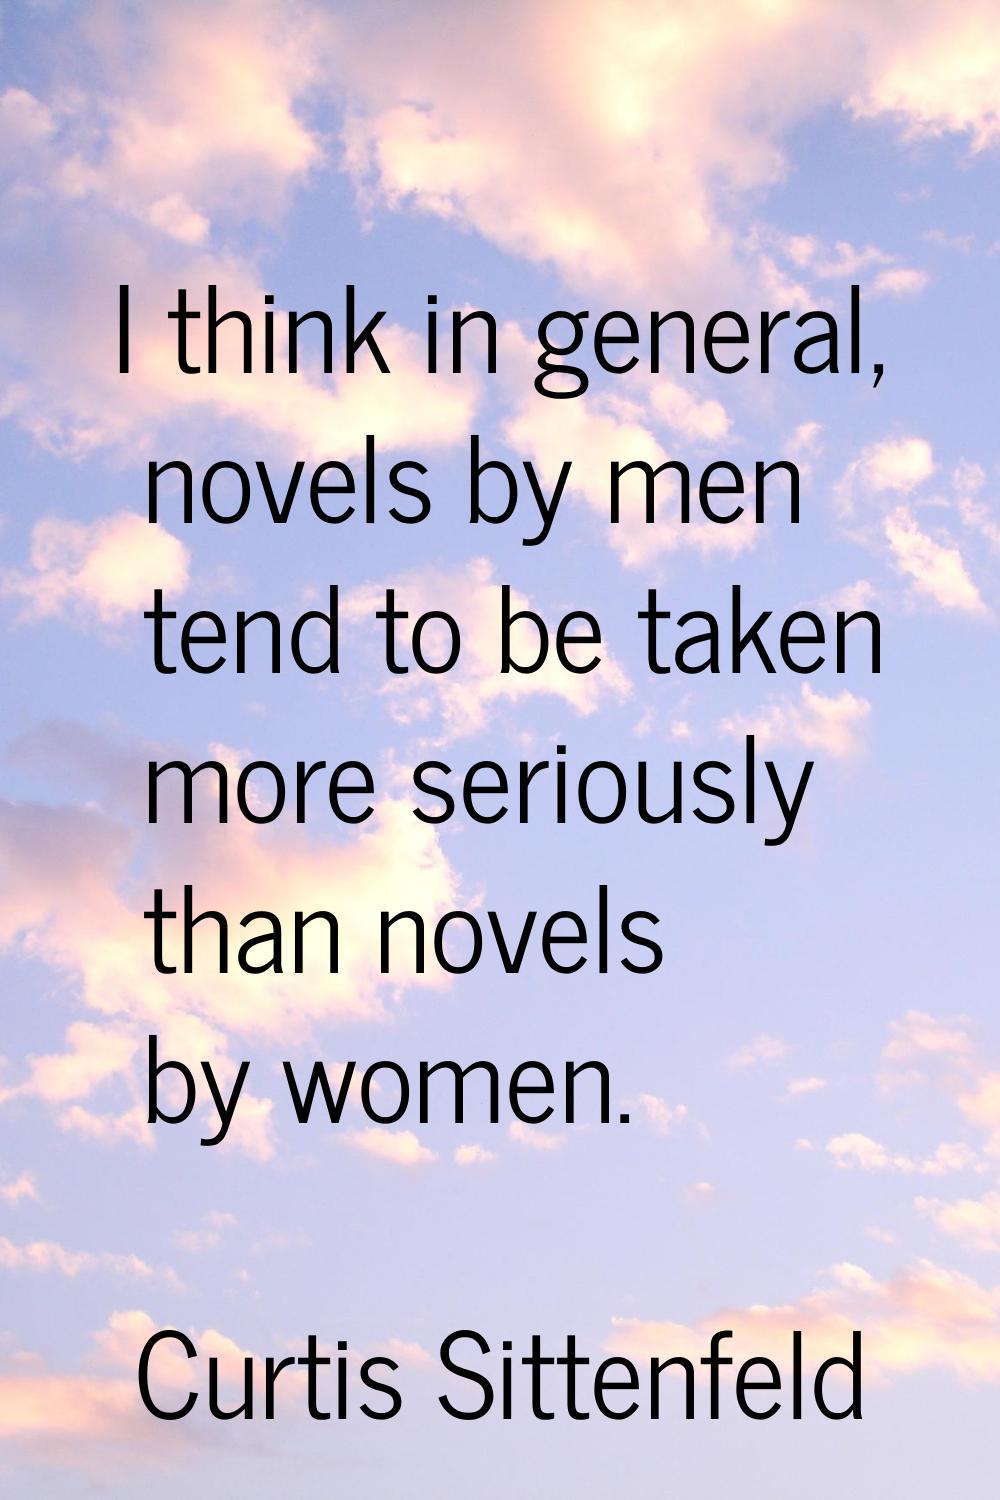 I think in general, novels by men tend to be taken more seriously than novels by women.